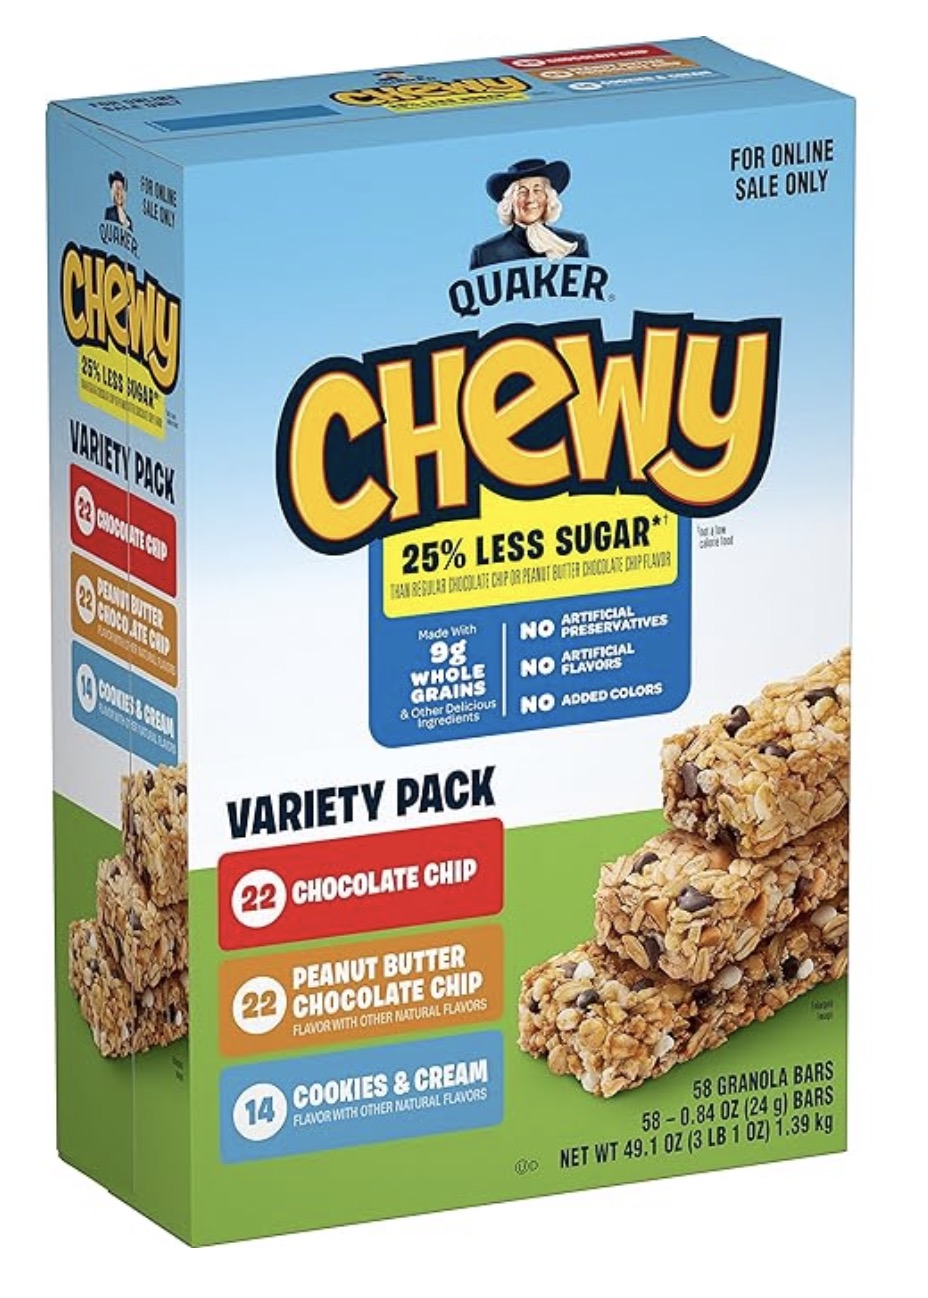 Quaker Chewy Granola Bars, 58 Rely solely $10.62 shipped!